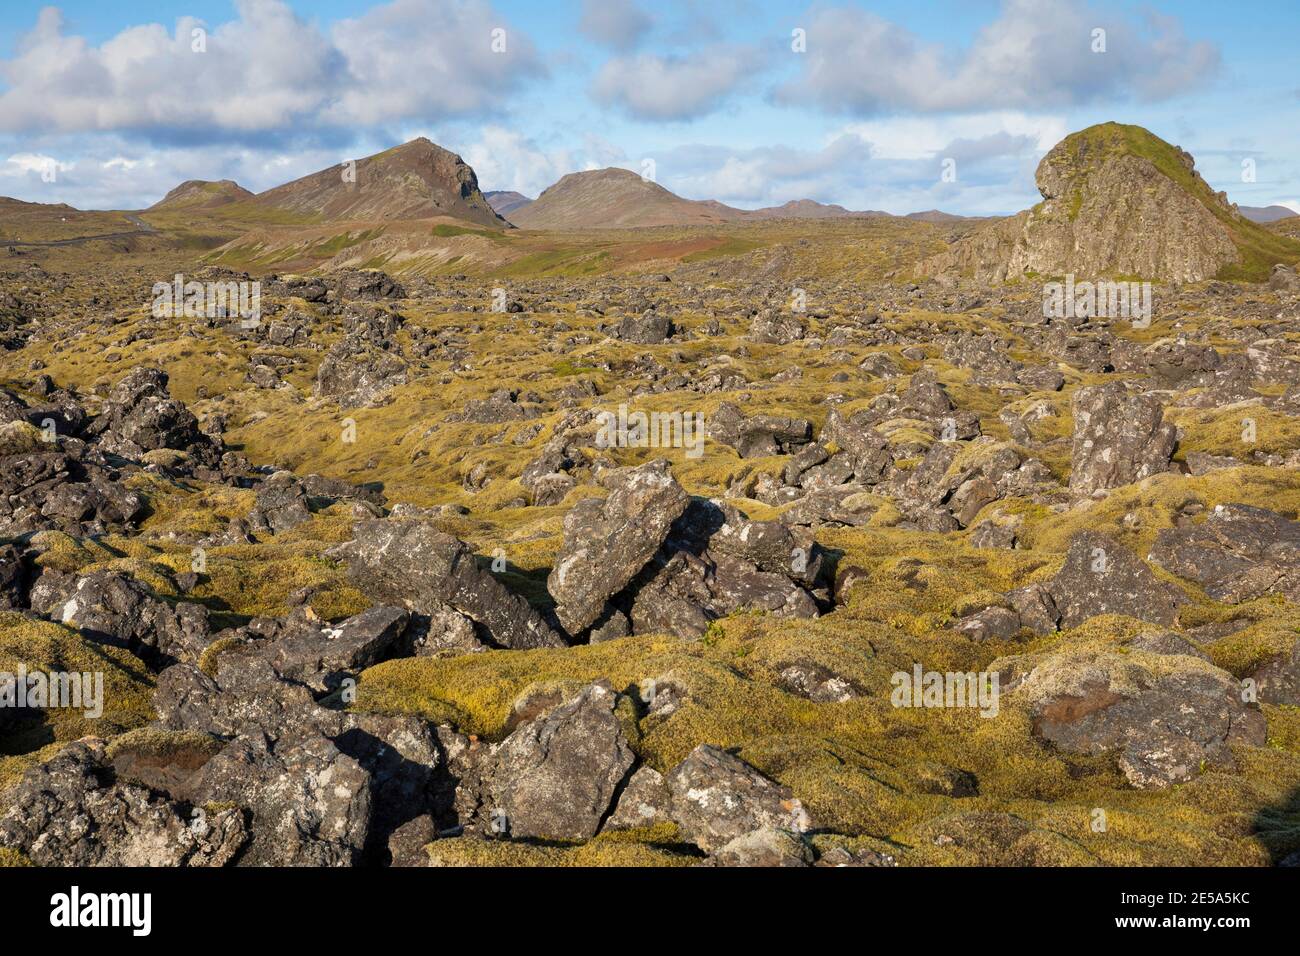 volcanic landscape with lichens and mosses, Iceland, Reykjanes Peninsula Stock Photo